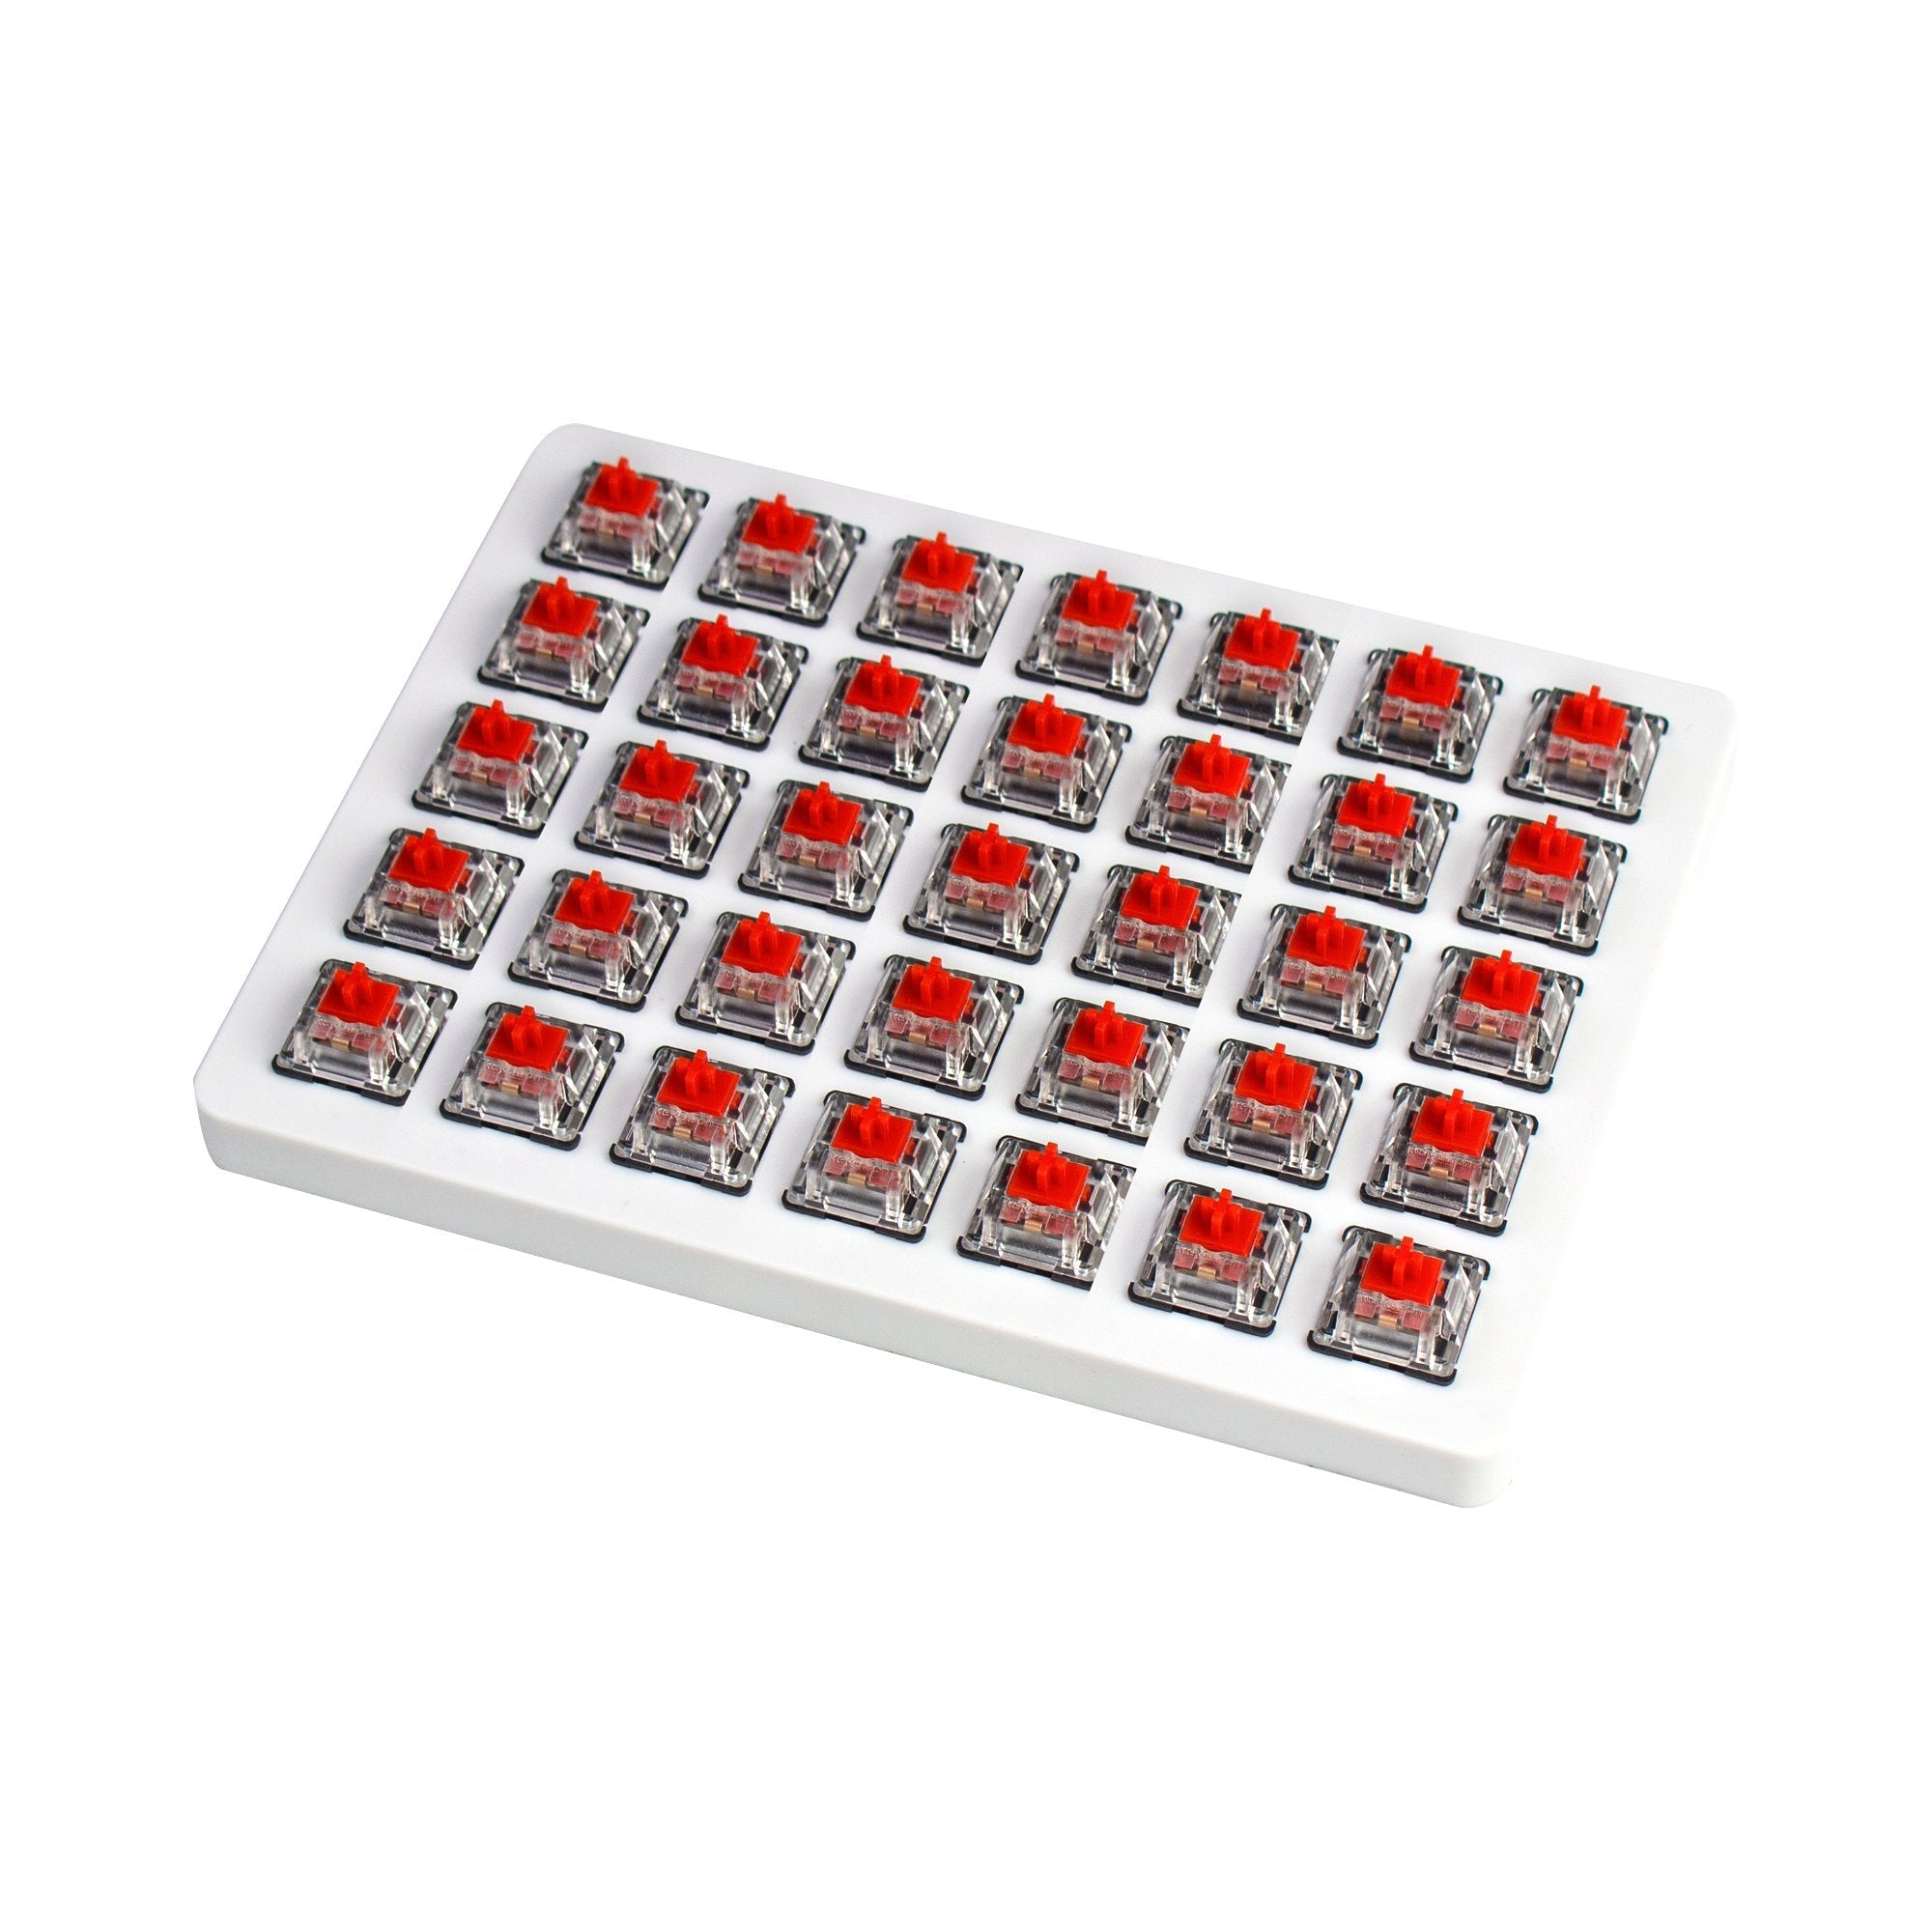 Keychron Mechanical Red Switch Set 35 pieces